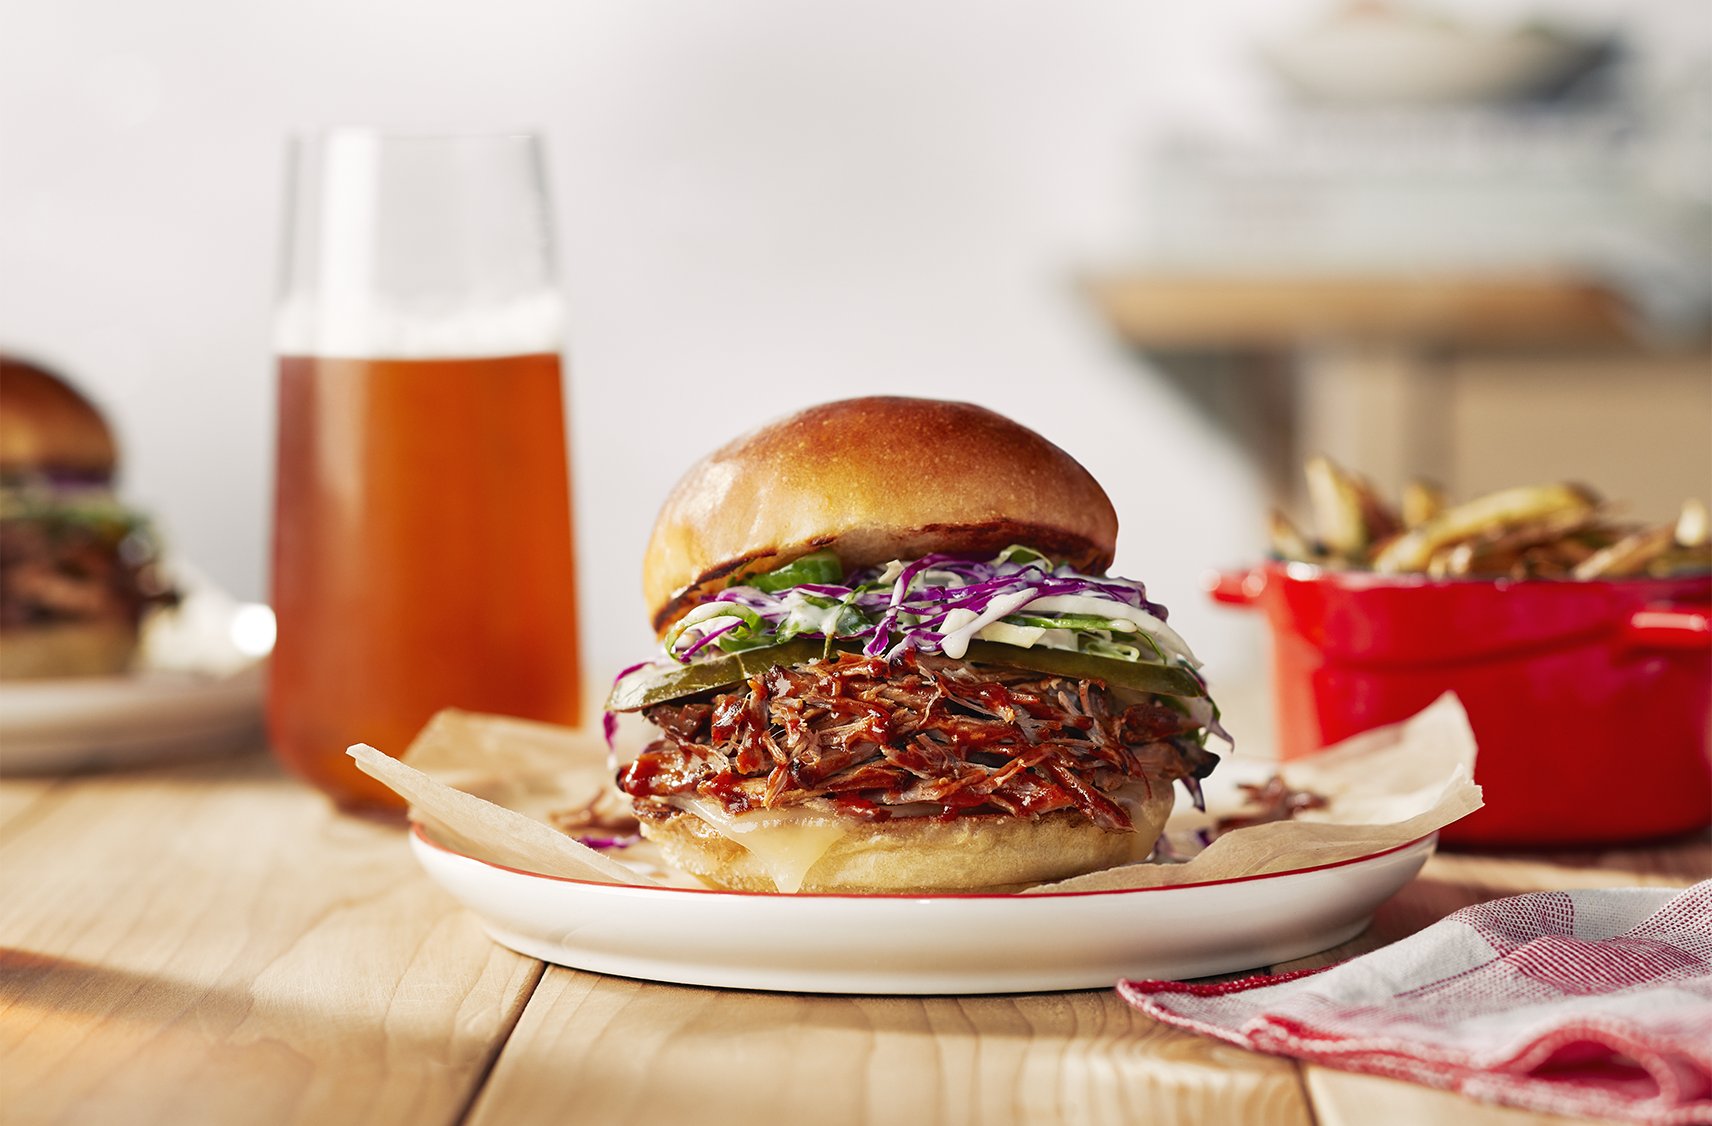 A pulled pork sandwich topped with a creamy slaw on a plate next to a serving of fries and a drink